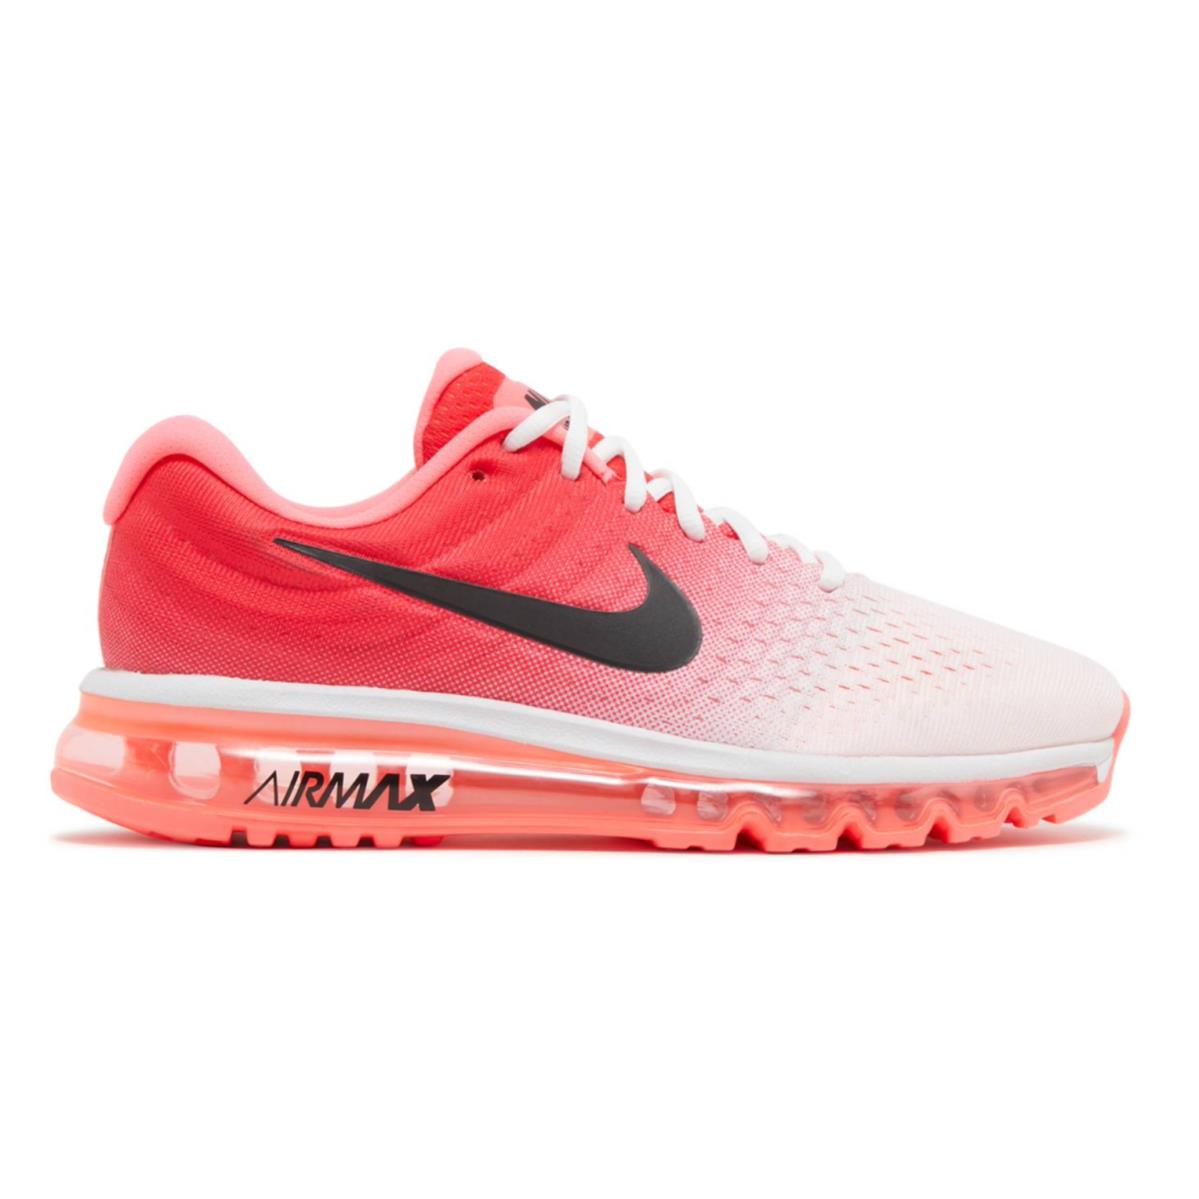 Nike Air Max 2017 Hot Punch Black White Low Top Athletic Shoes Women`s 5